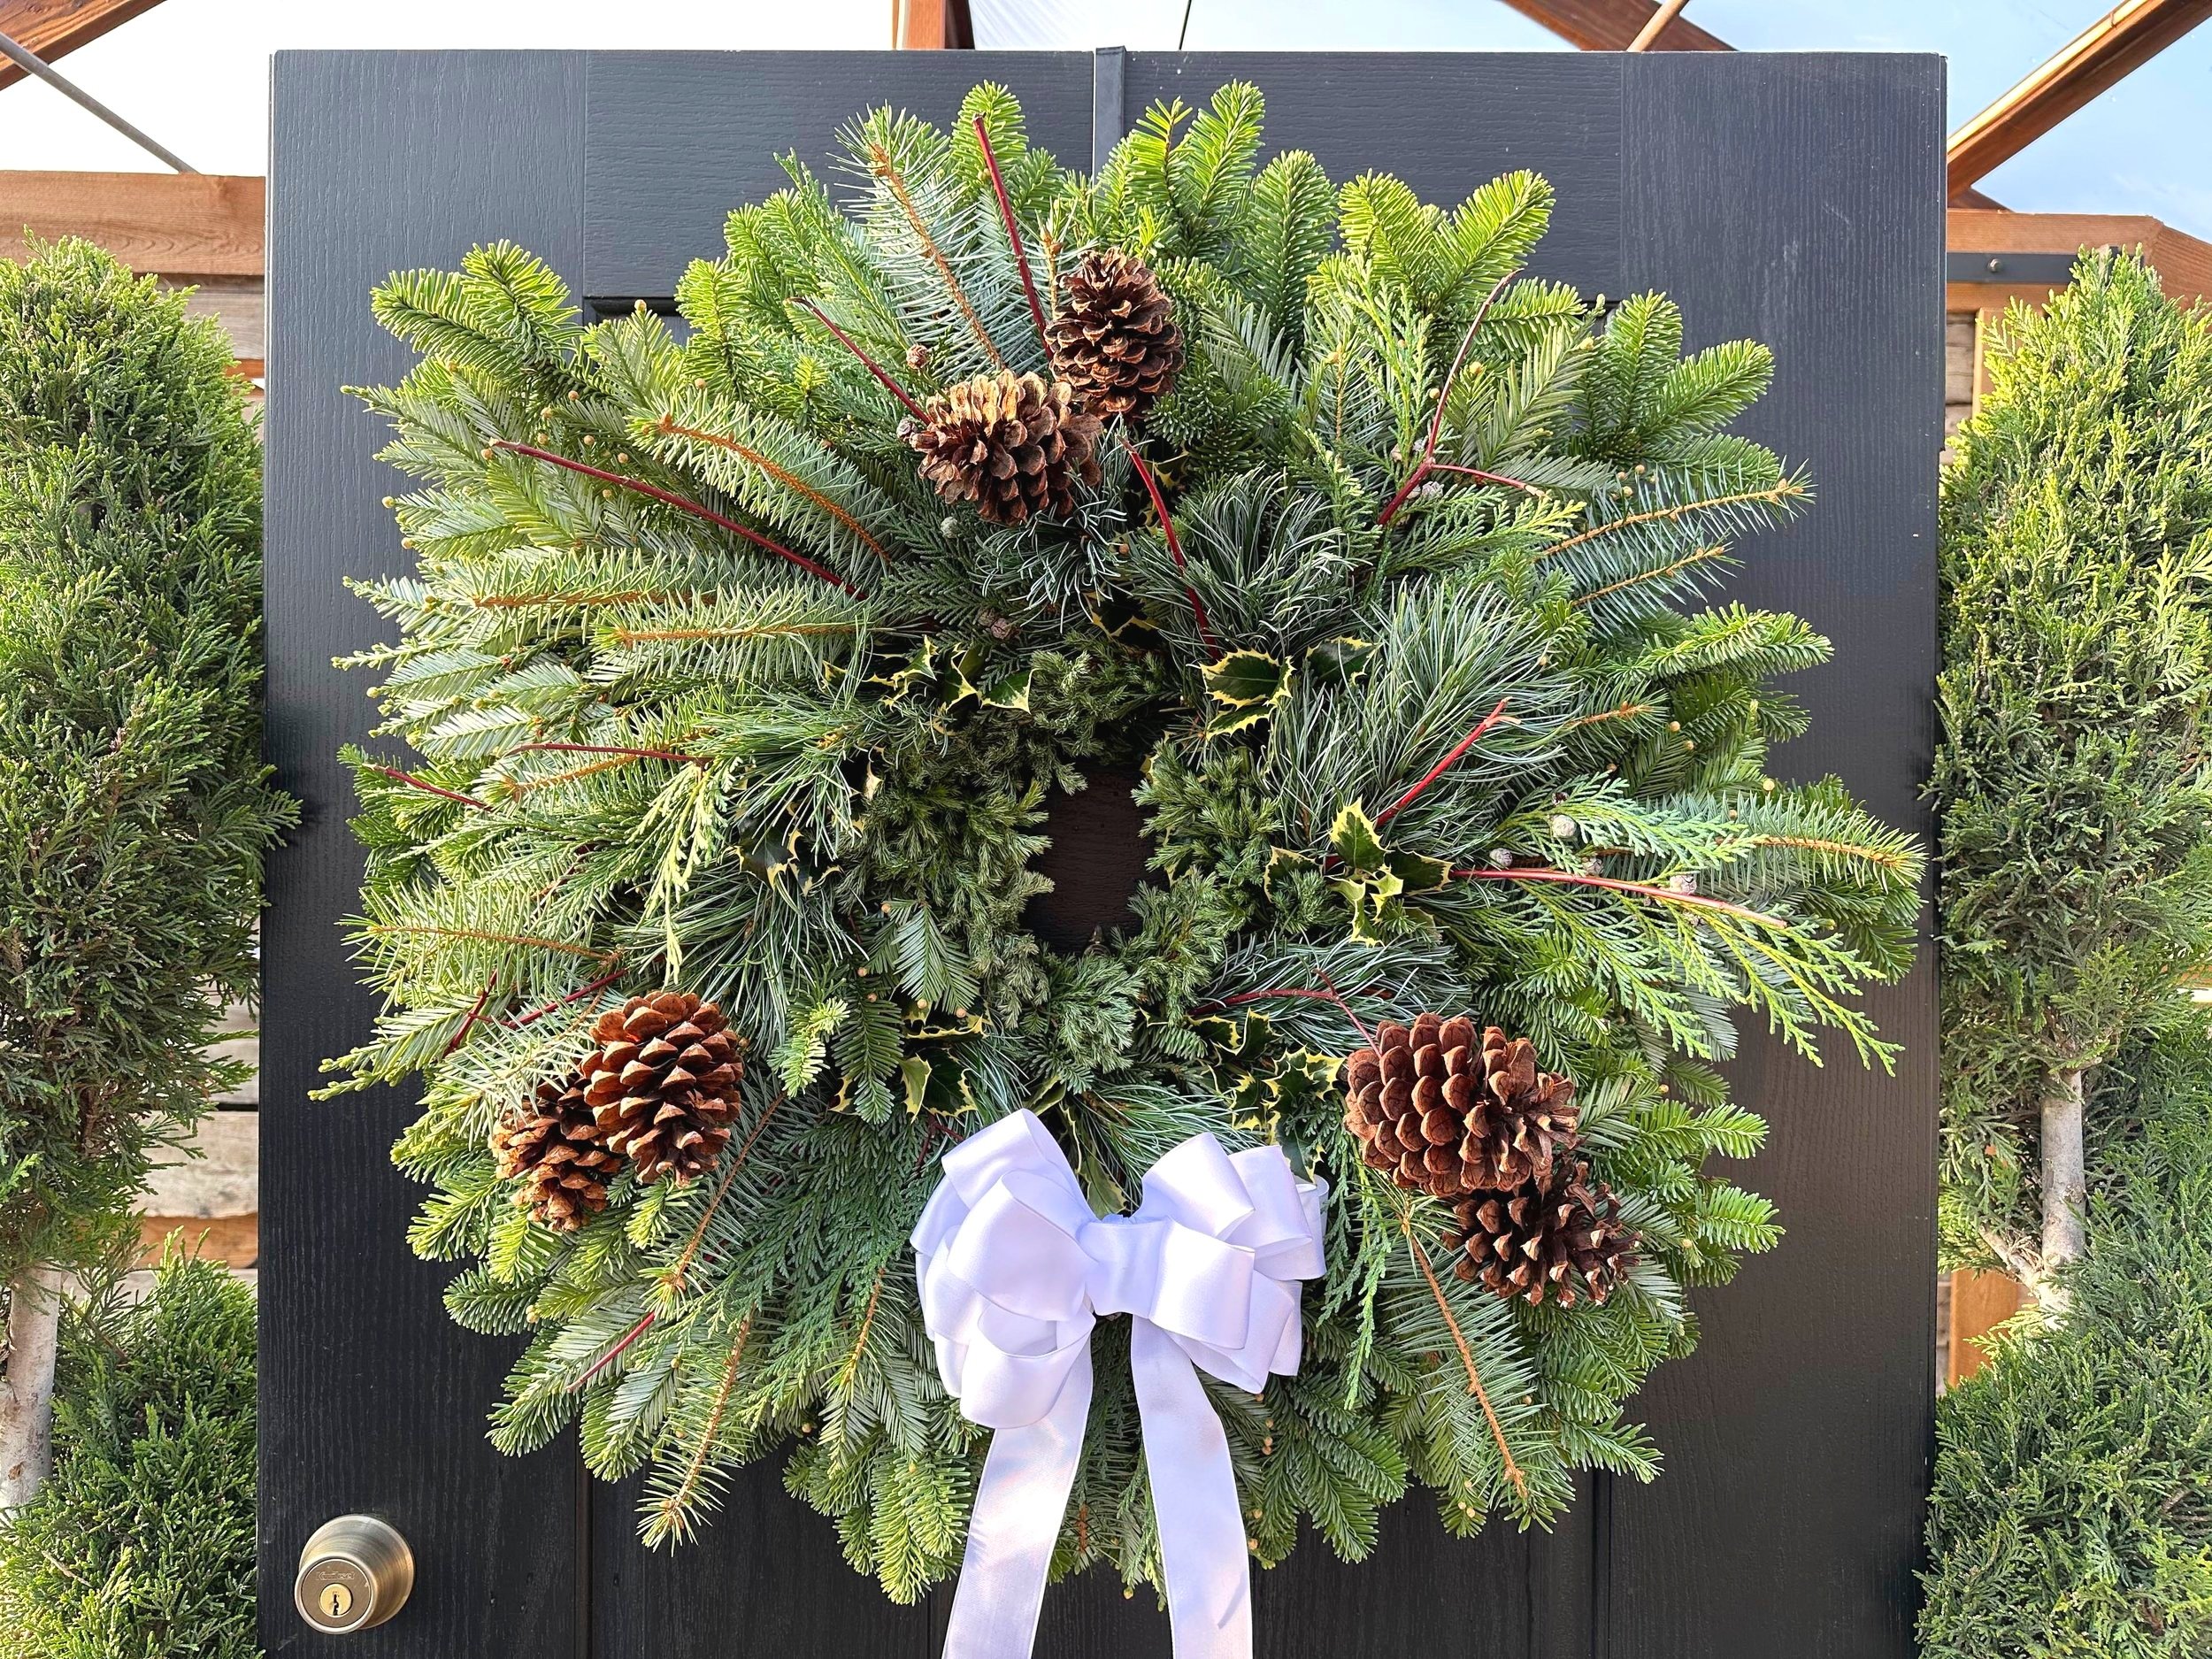 Wreath+%236+with+pinecones+%26+white+bow3.jpg